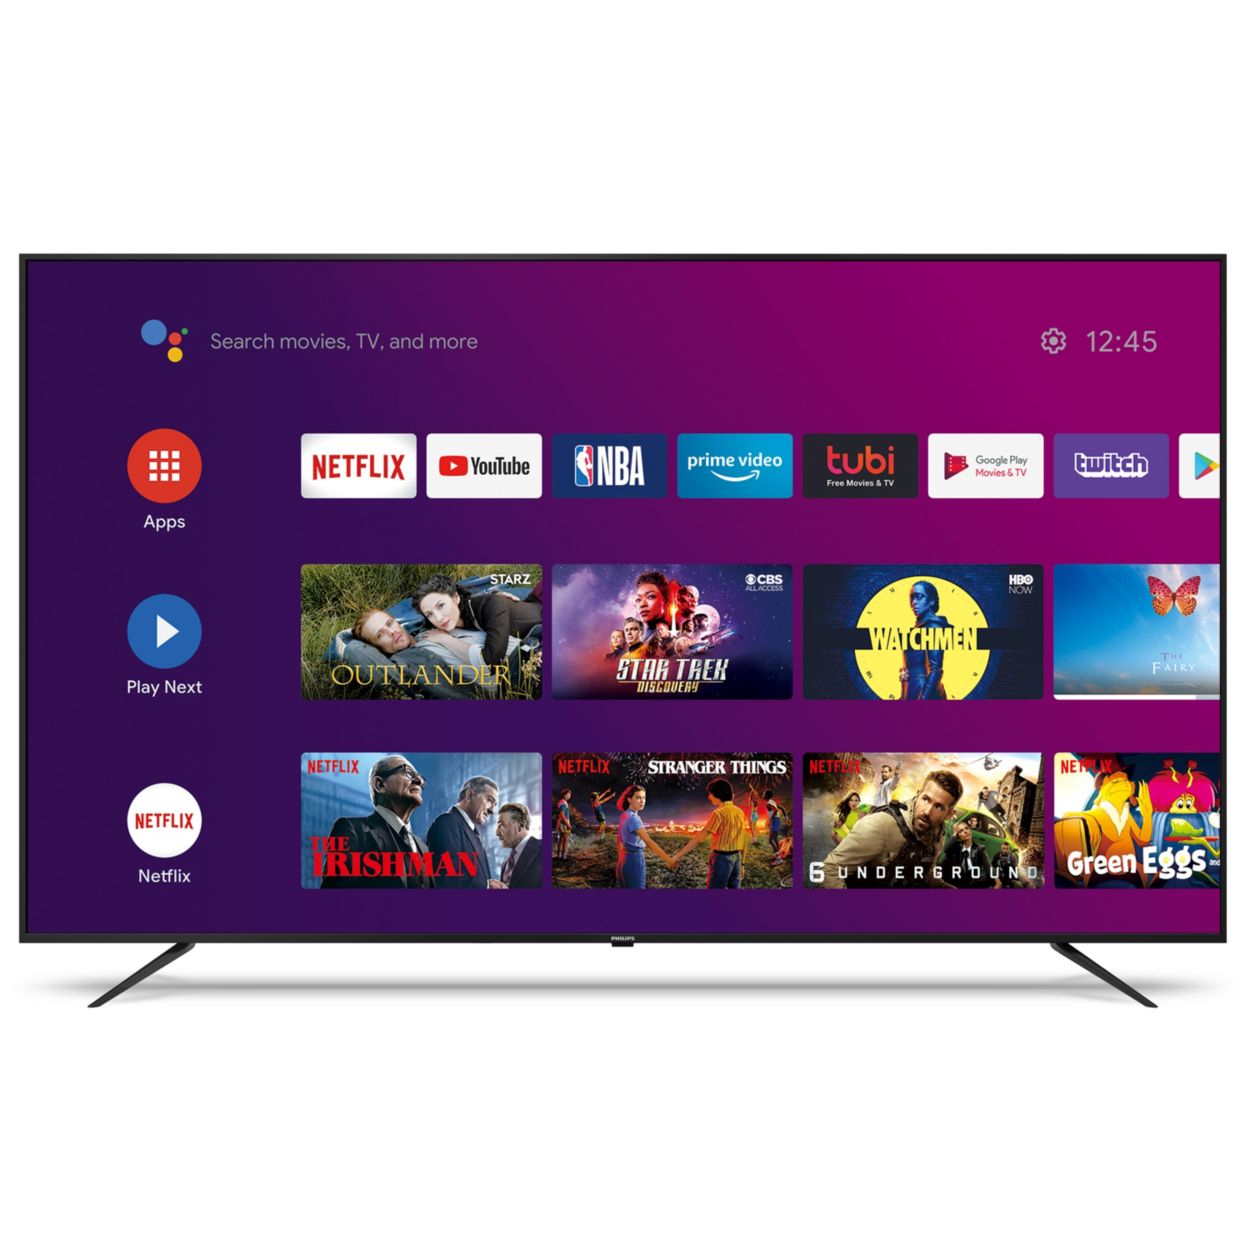 Philips 75 Class 4K Android Smart TV with Google Assistant